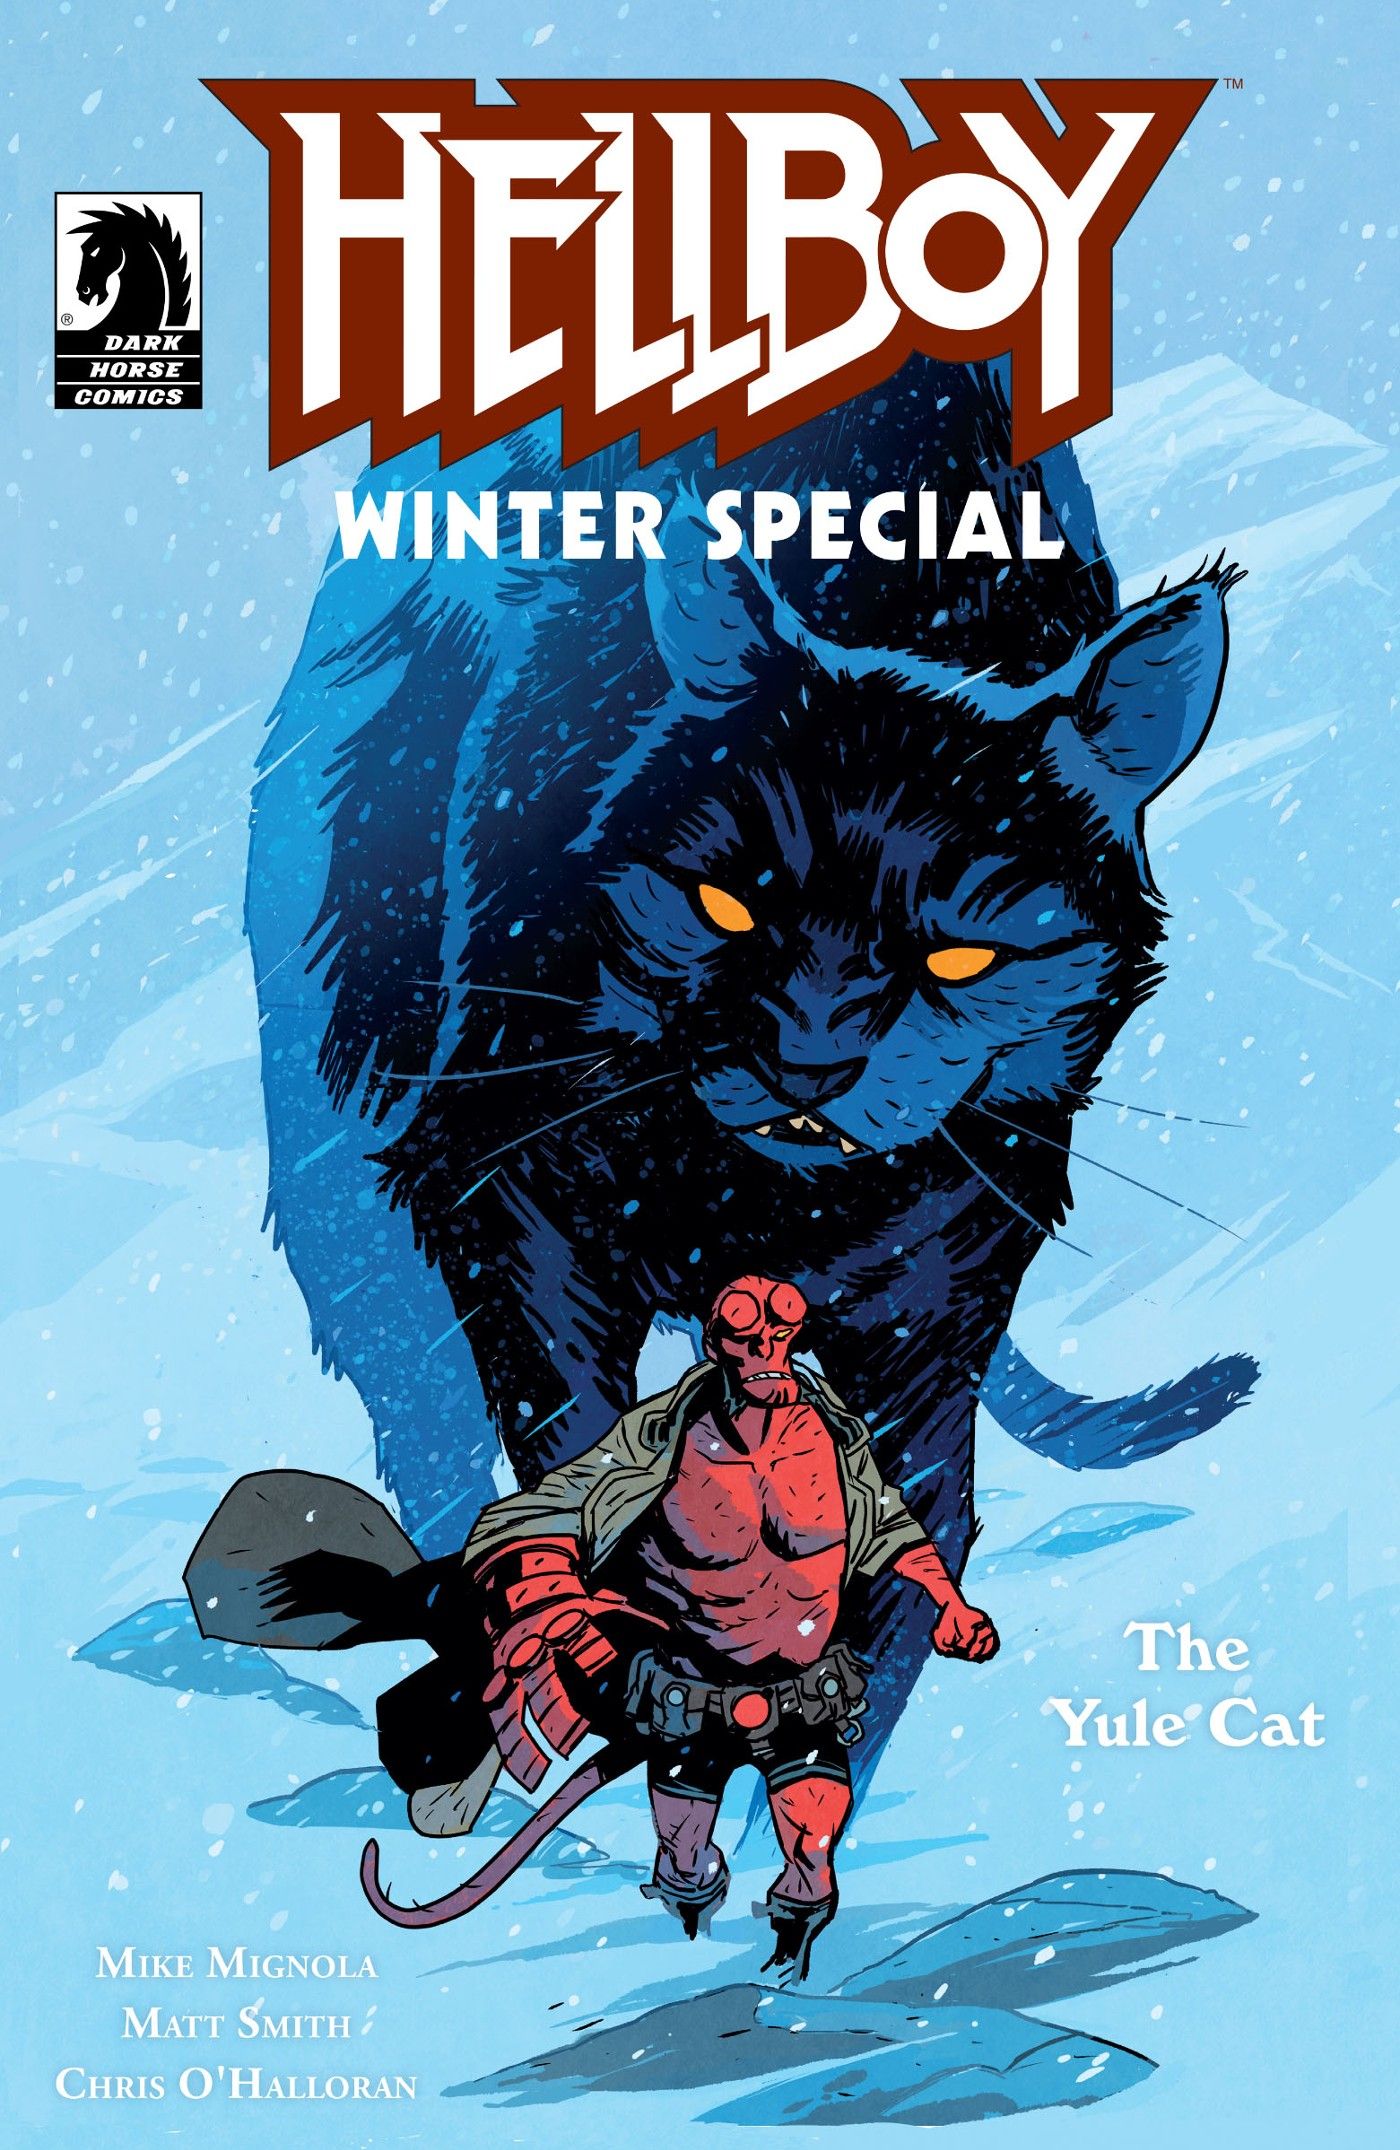 Exclusive: The Hellboy Winter Special: The Yule Cat Gives Children’s Folklore A Terrifying Twist